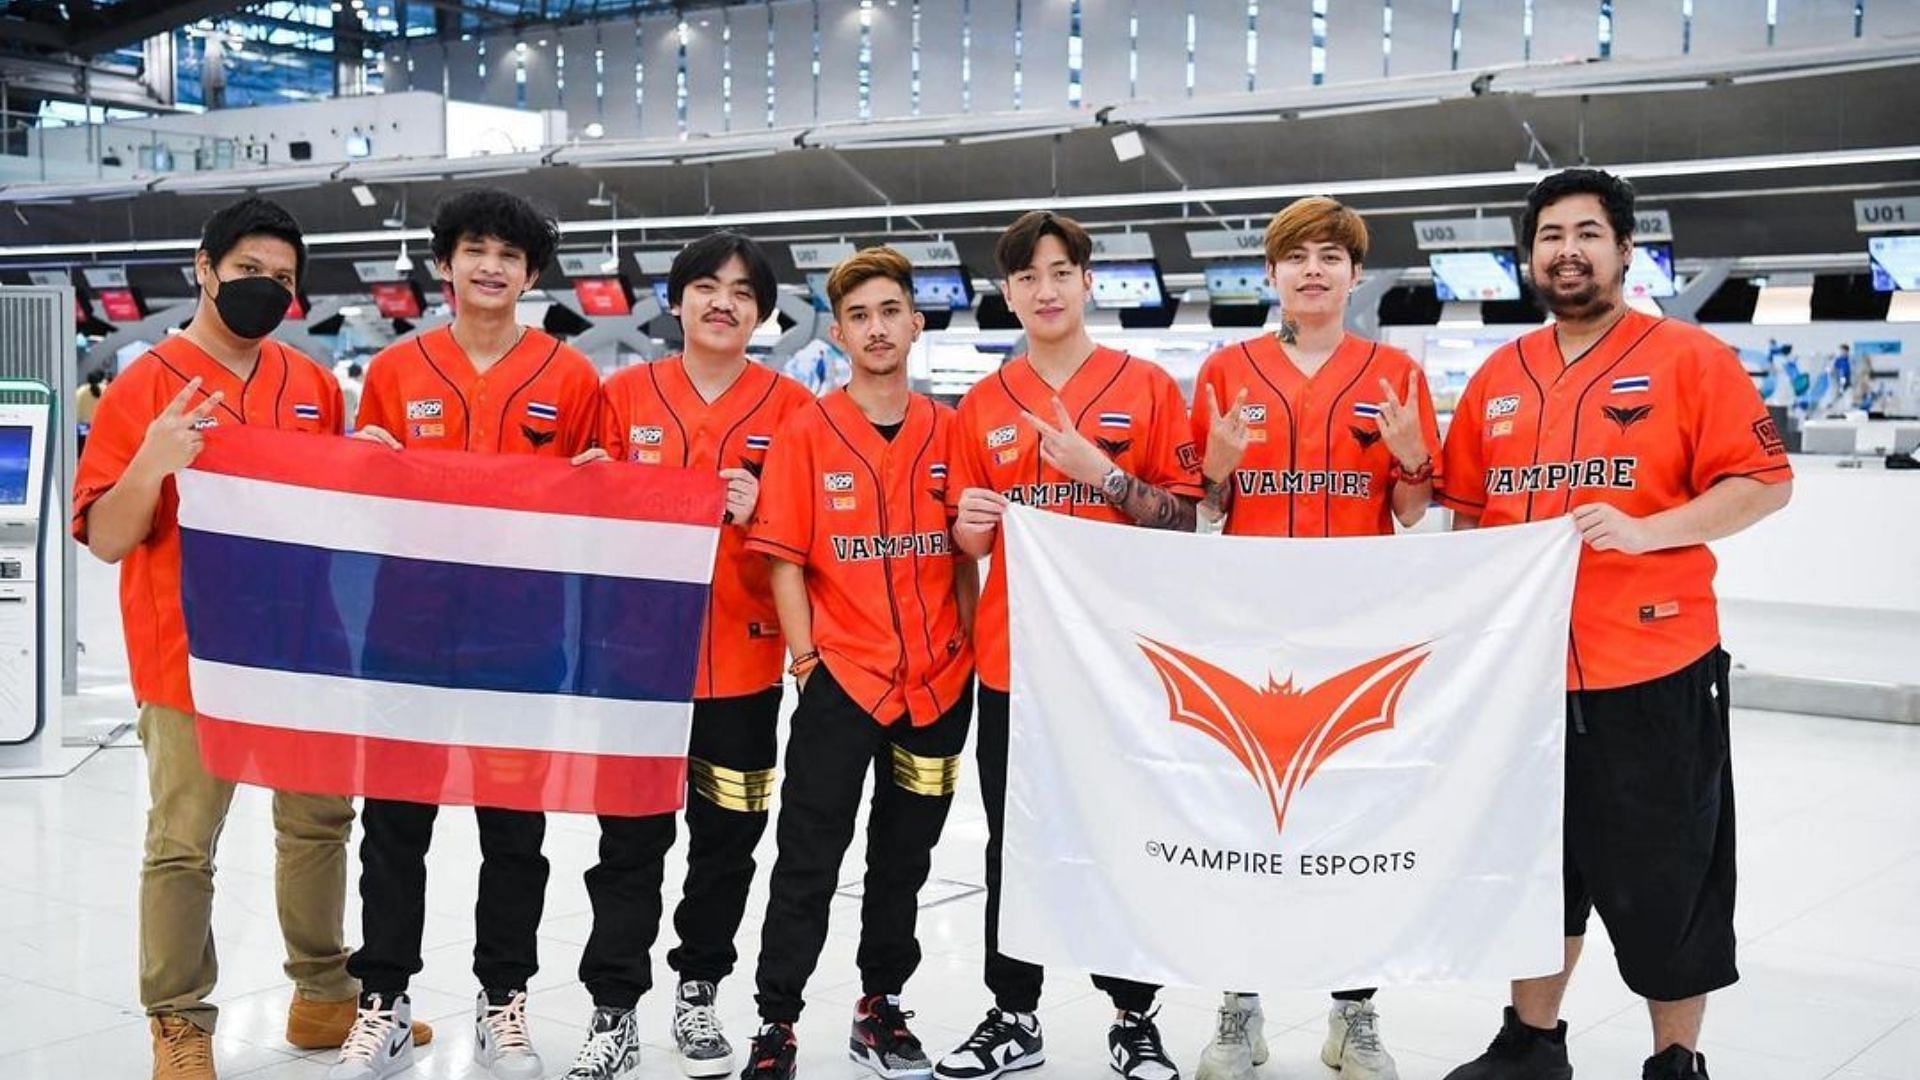 Vampire Esports grabbed first place in PMPL SEA Championship (Image via PUBG Mobile)